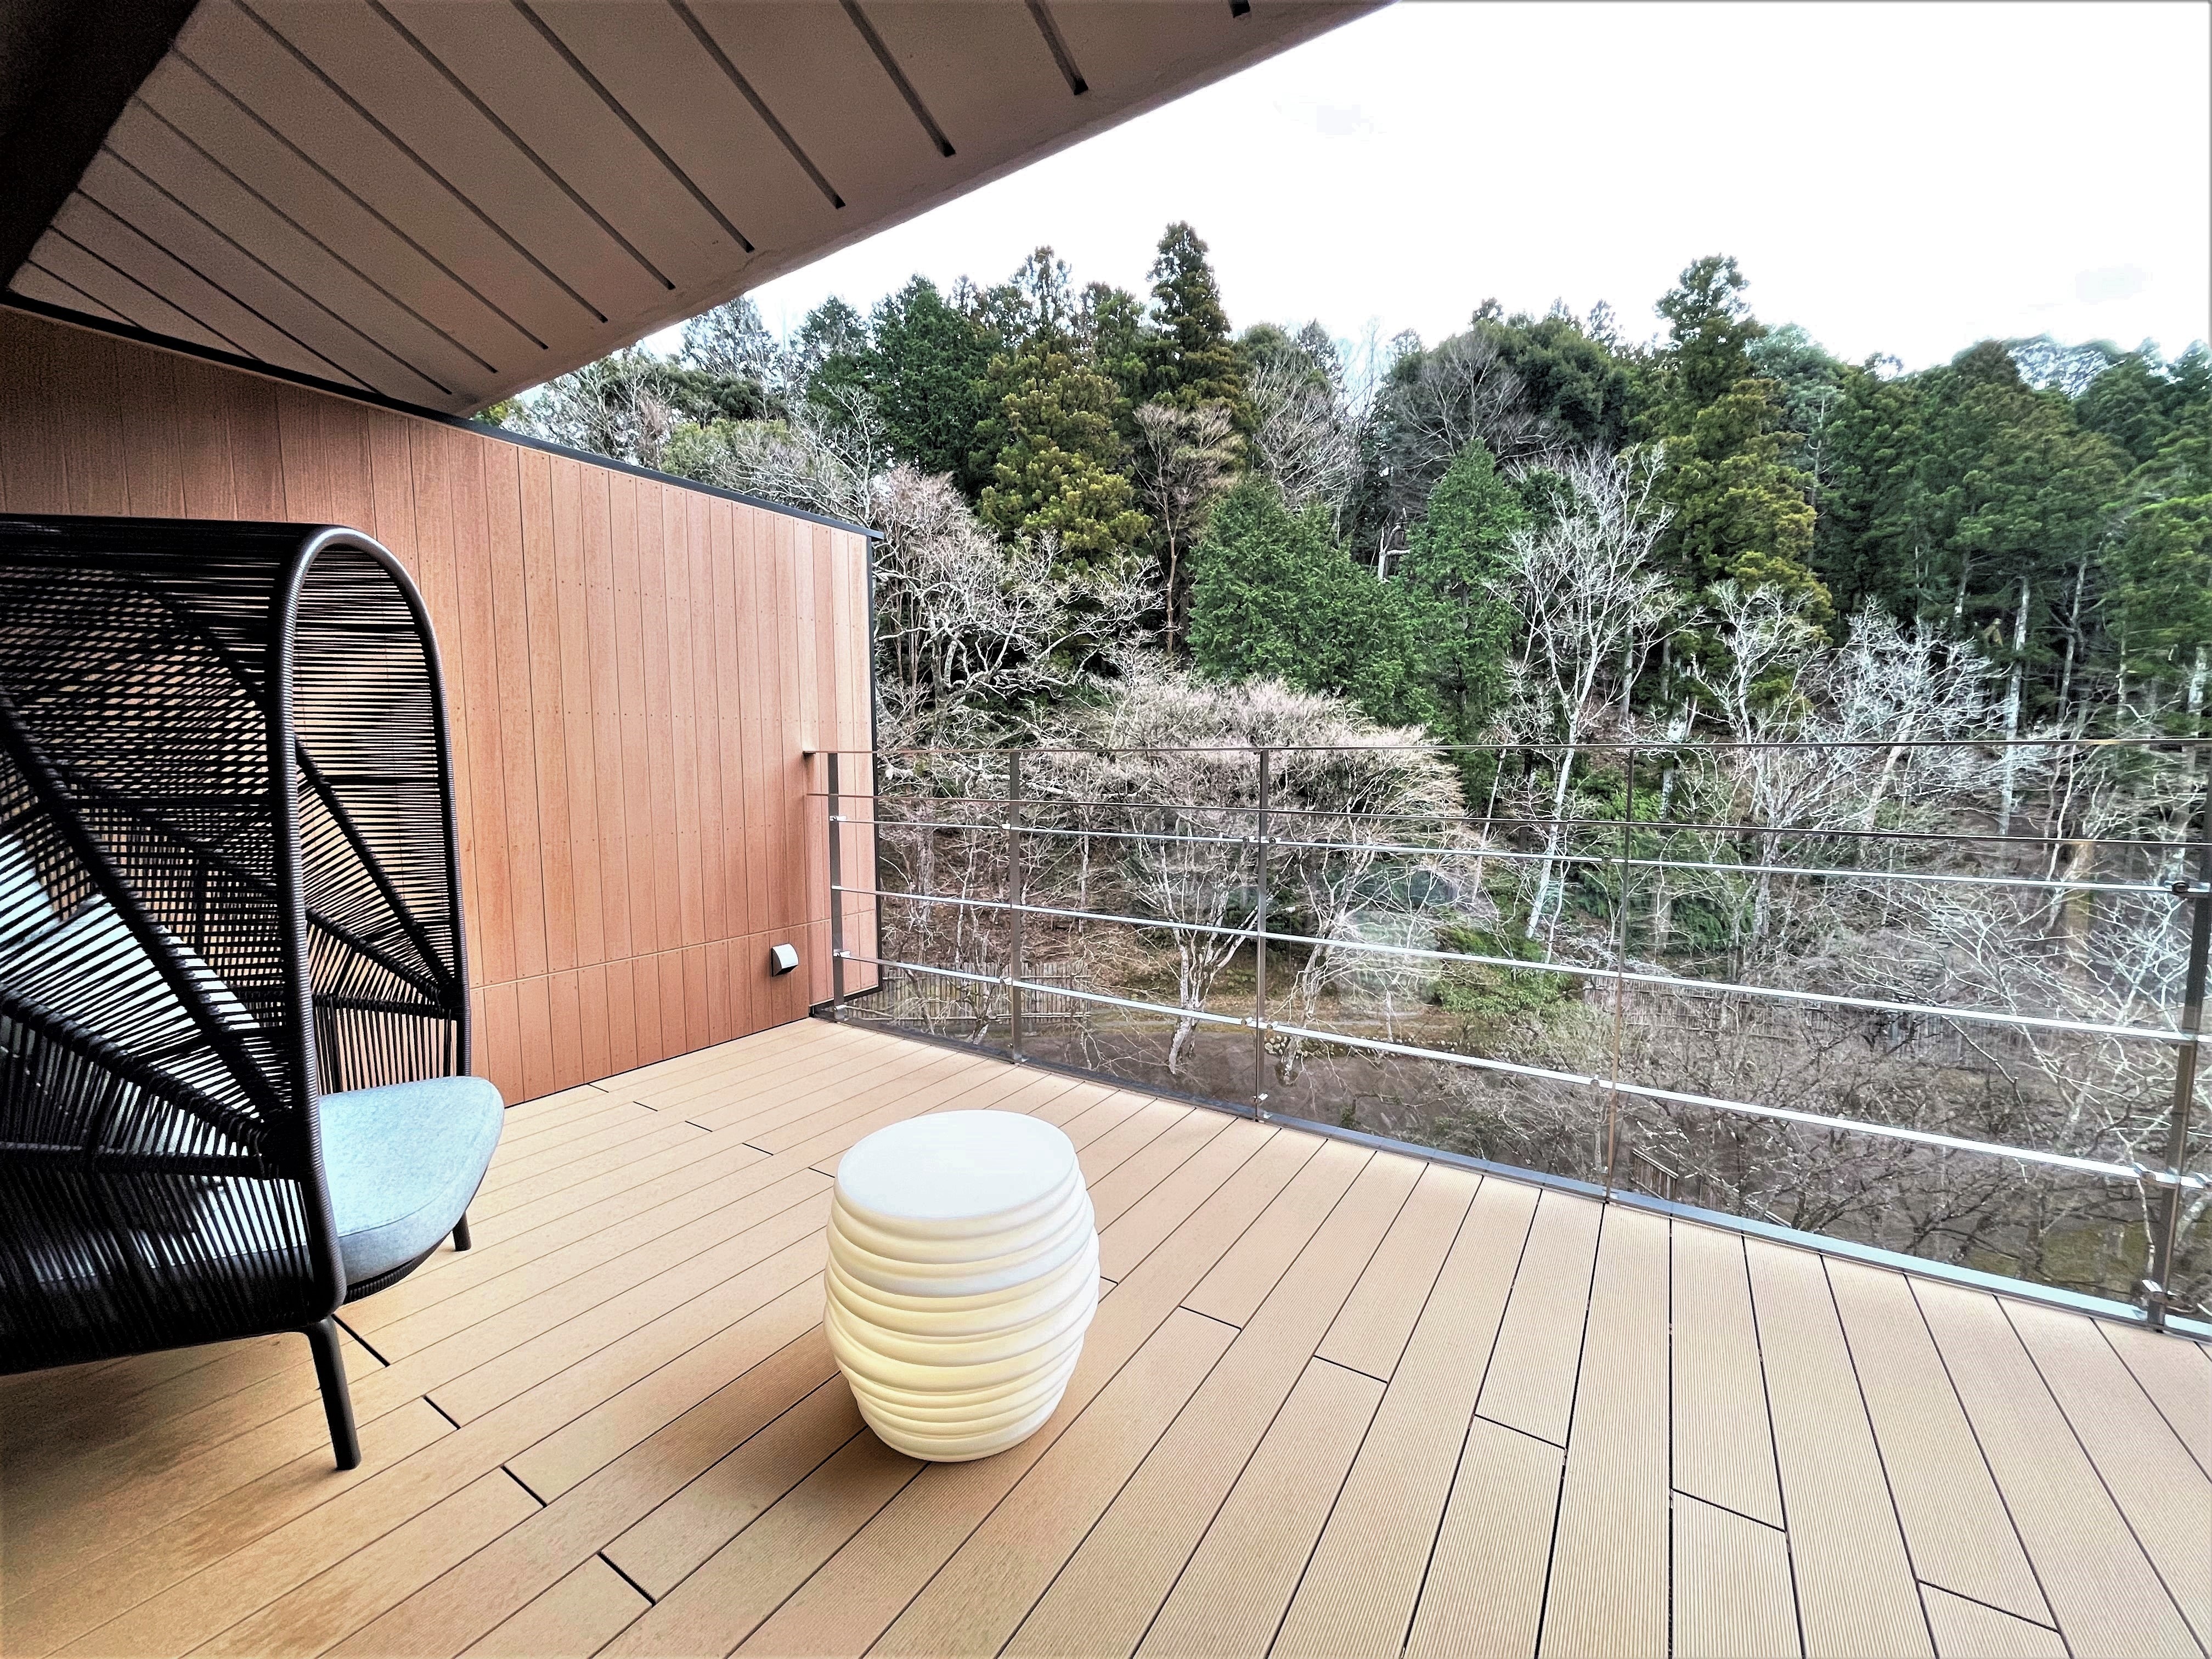 Semi-open-air hot spring & terrace + guest room with bed (view / image from the terrace)